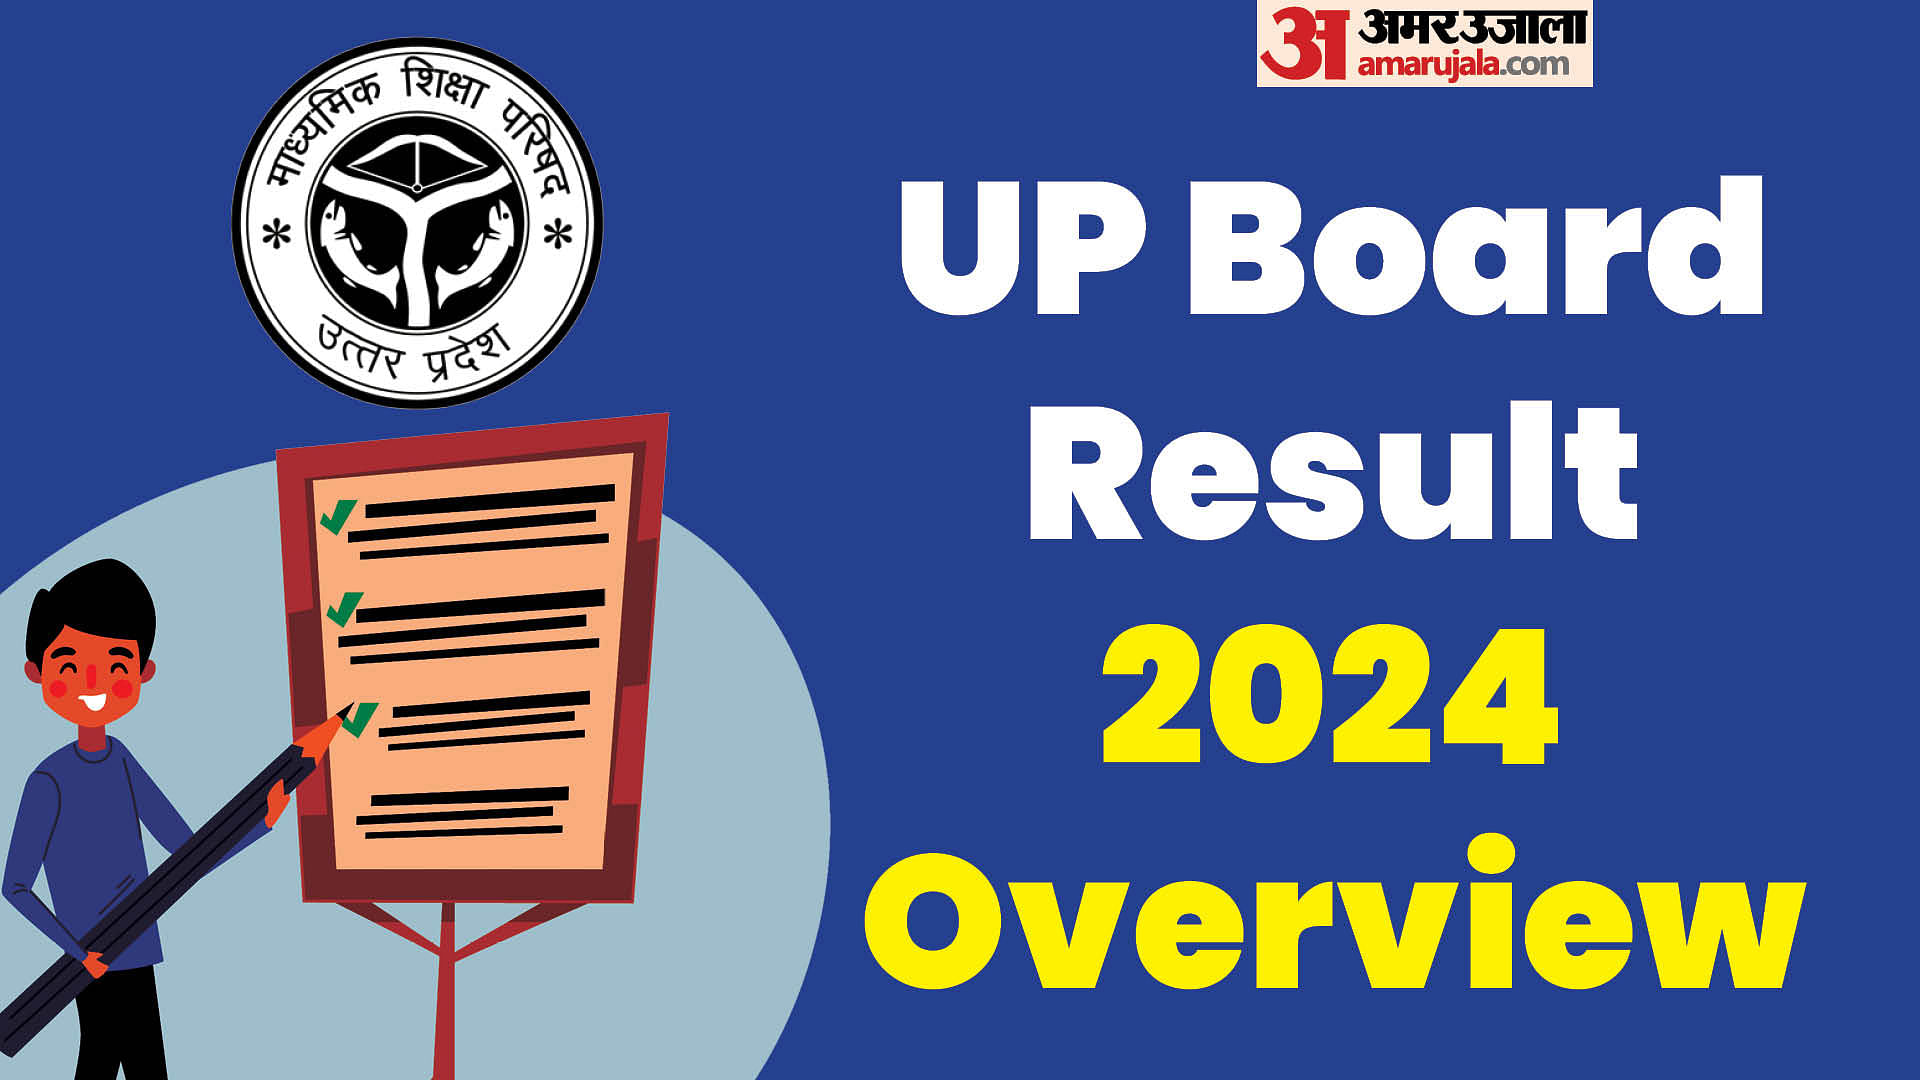 UP Board 10th, 12th Result 2024 Declared, Read the Overview of marks and analysis here